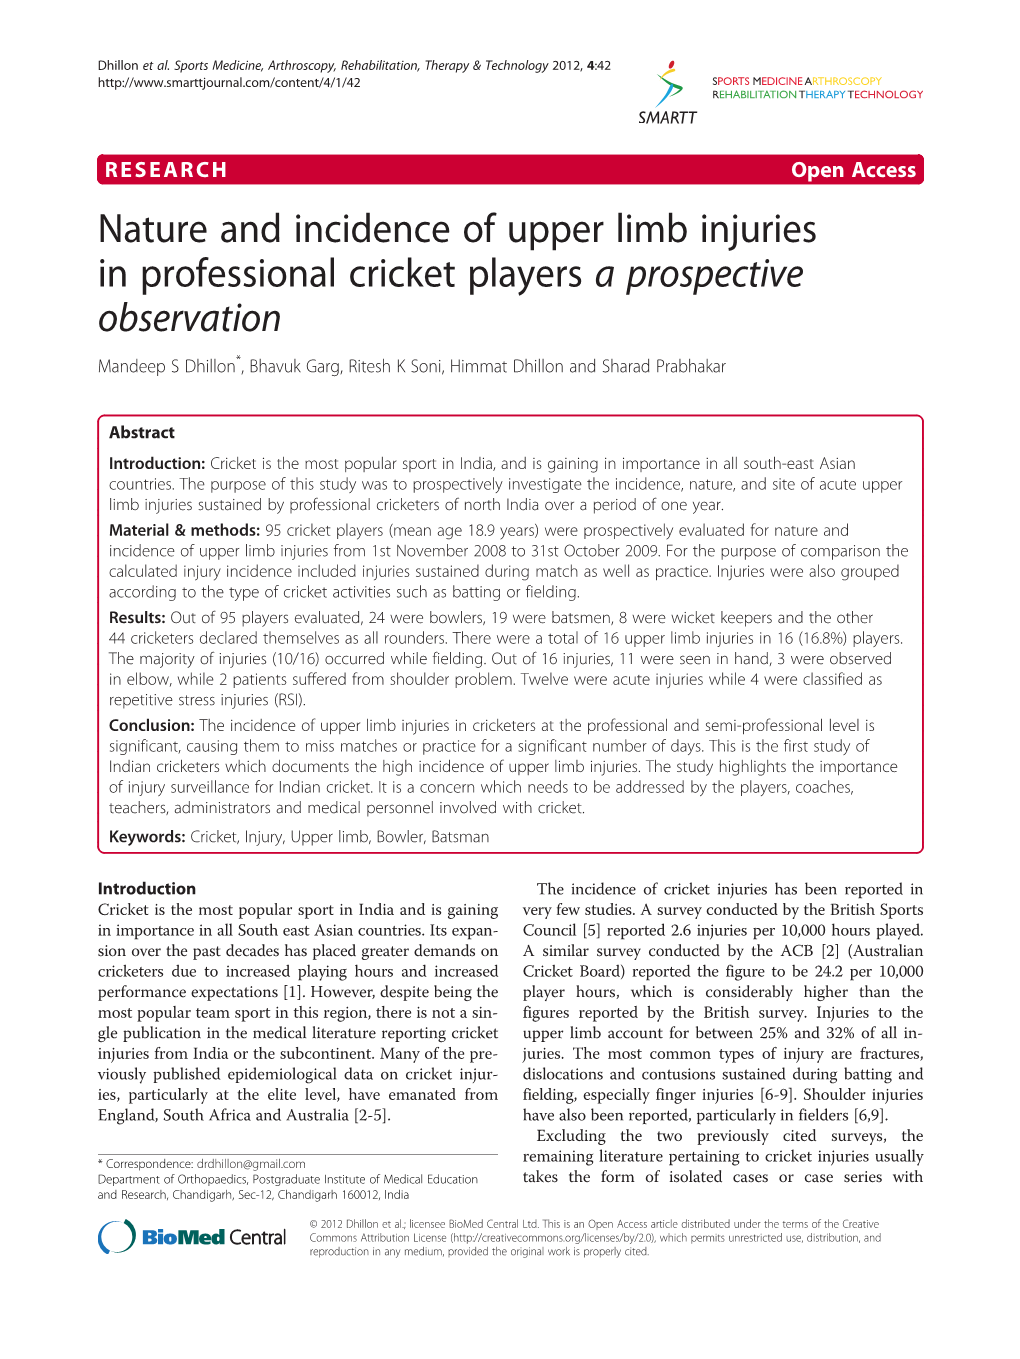 Nature and Incidence of Upper Limb Injuries in Professional Cricket Players a Prospective Observation